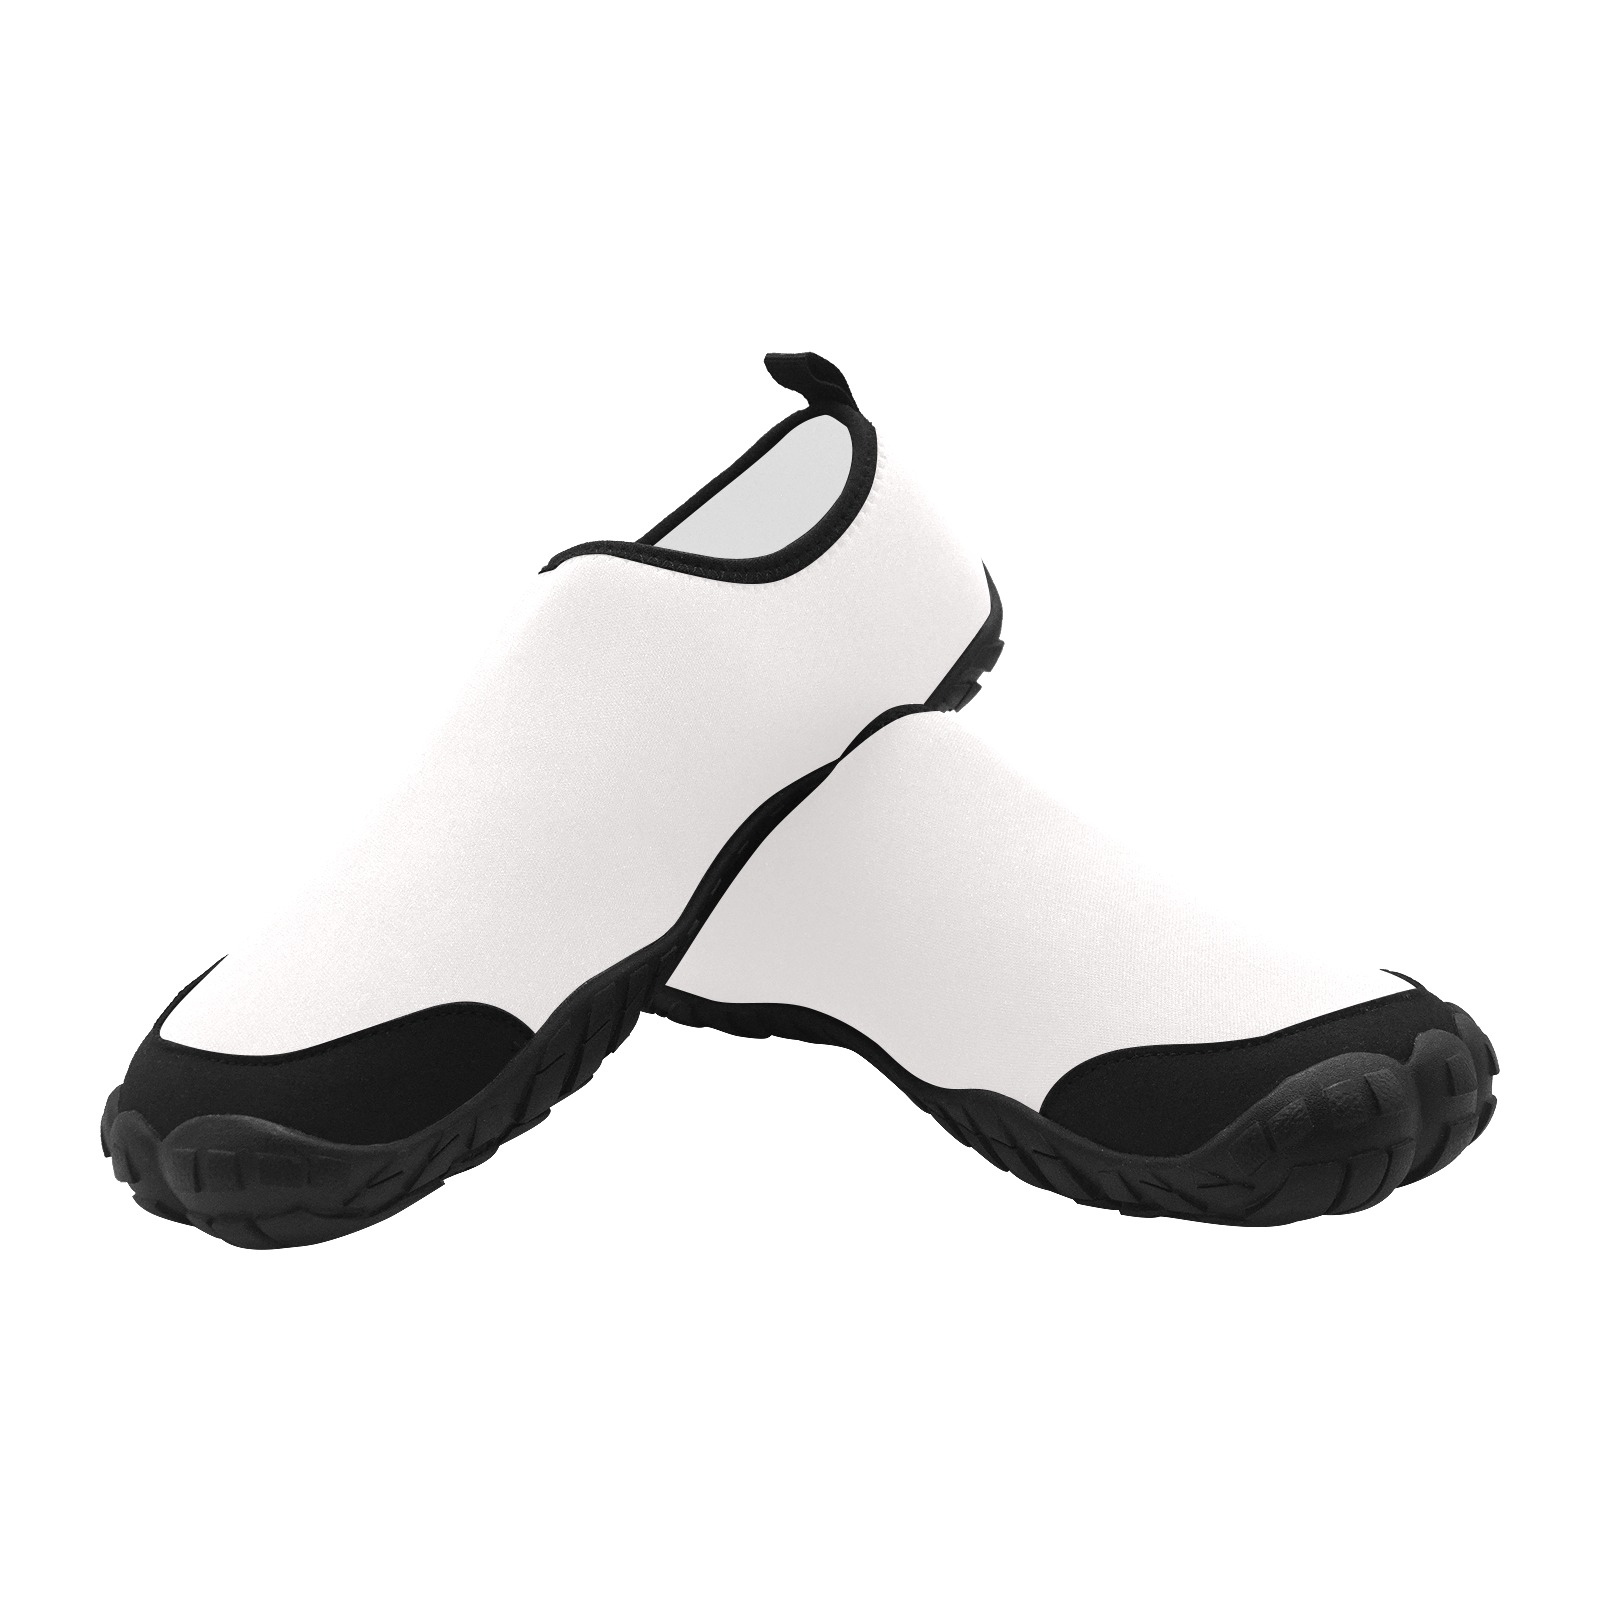 Men's Barefoot Water Shoes (Model KY21091)